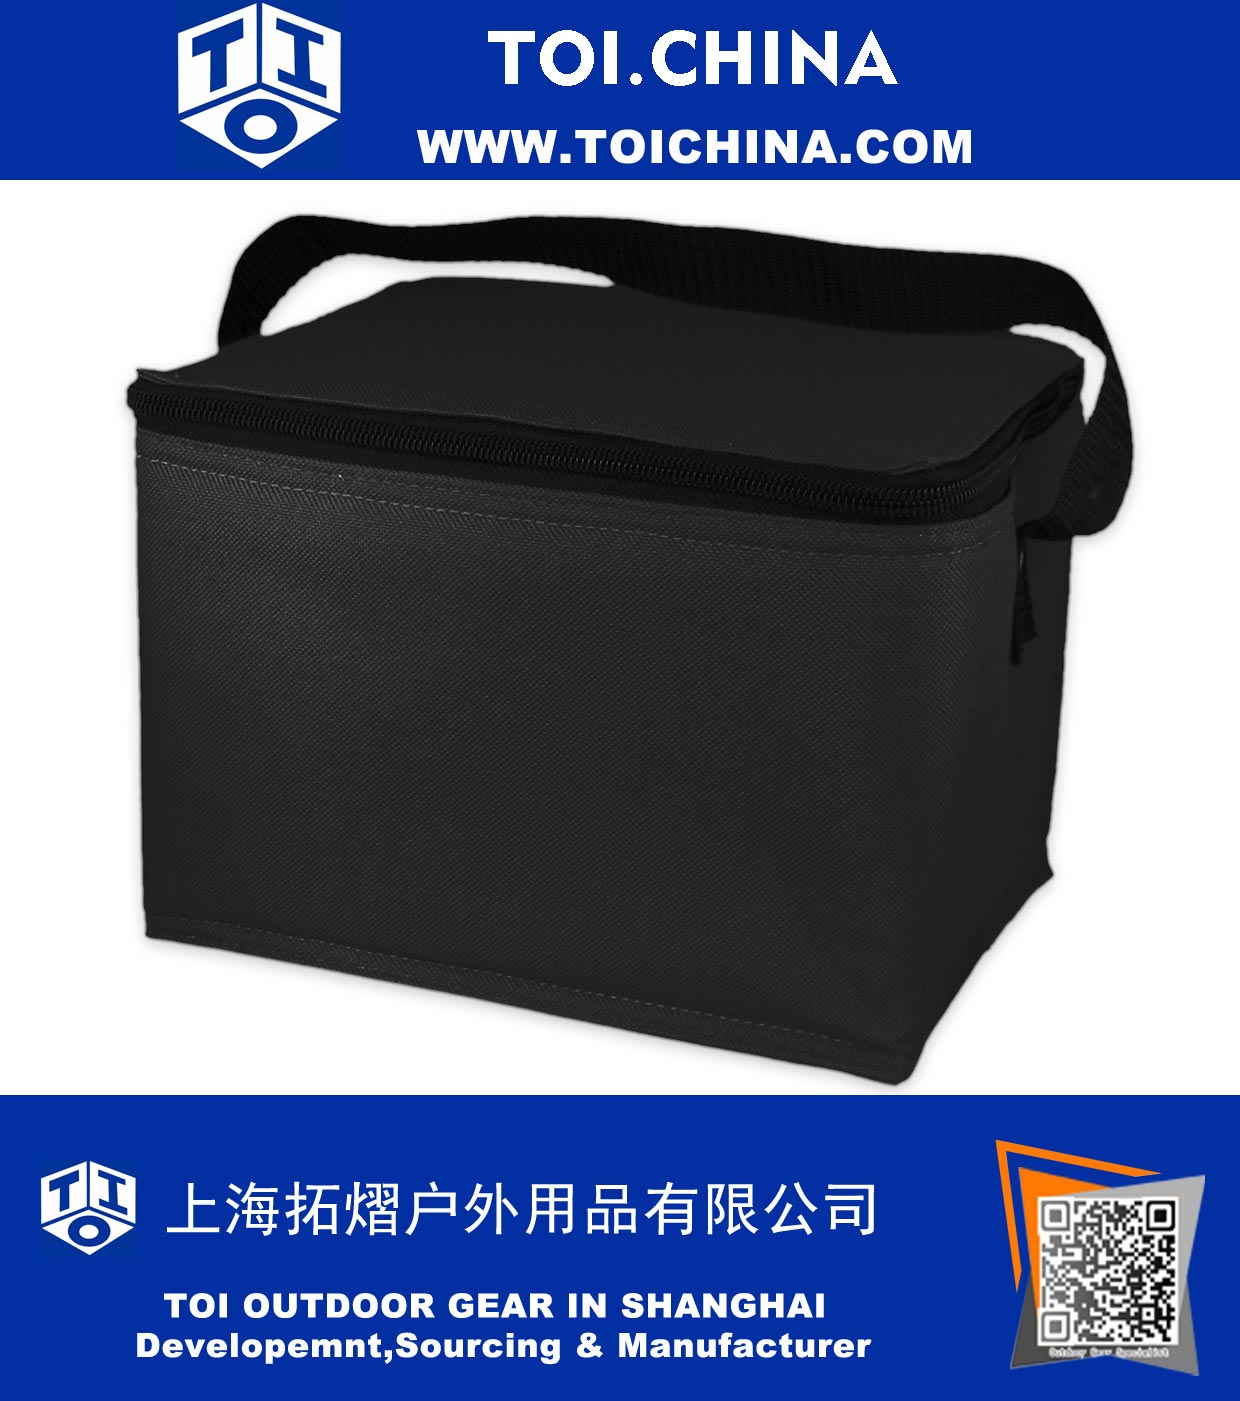 Lunch Boxes Insulated Lunch Box Cooler Bag, Black